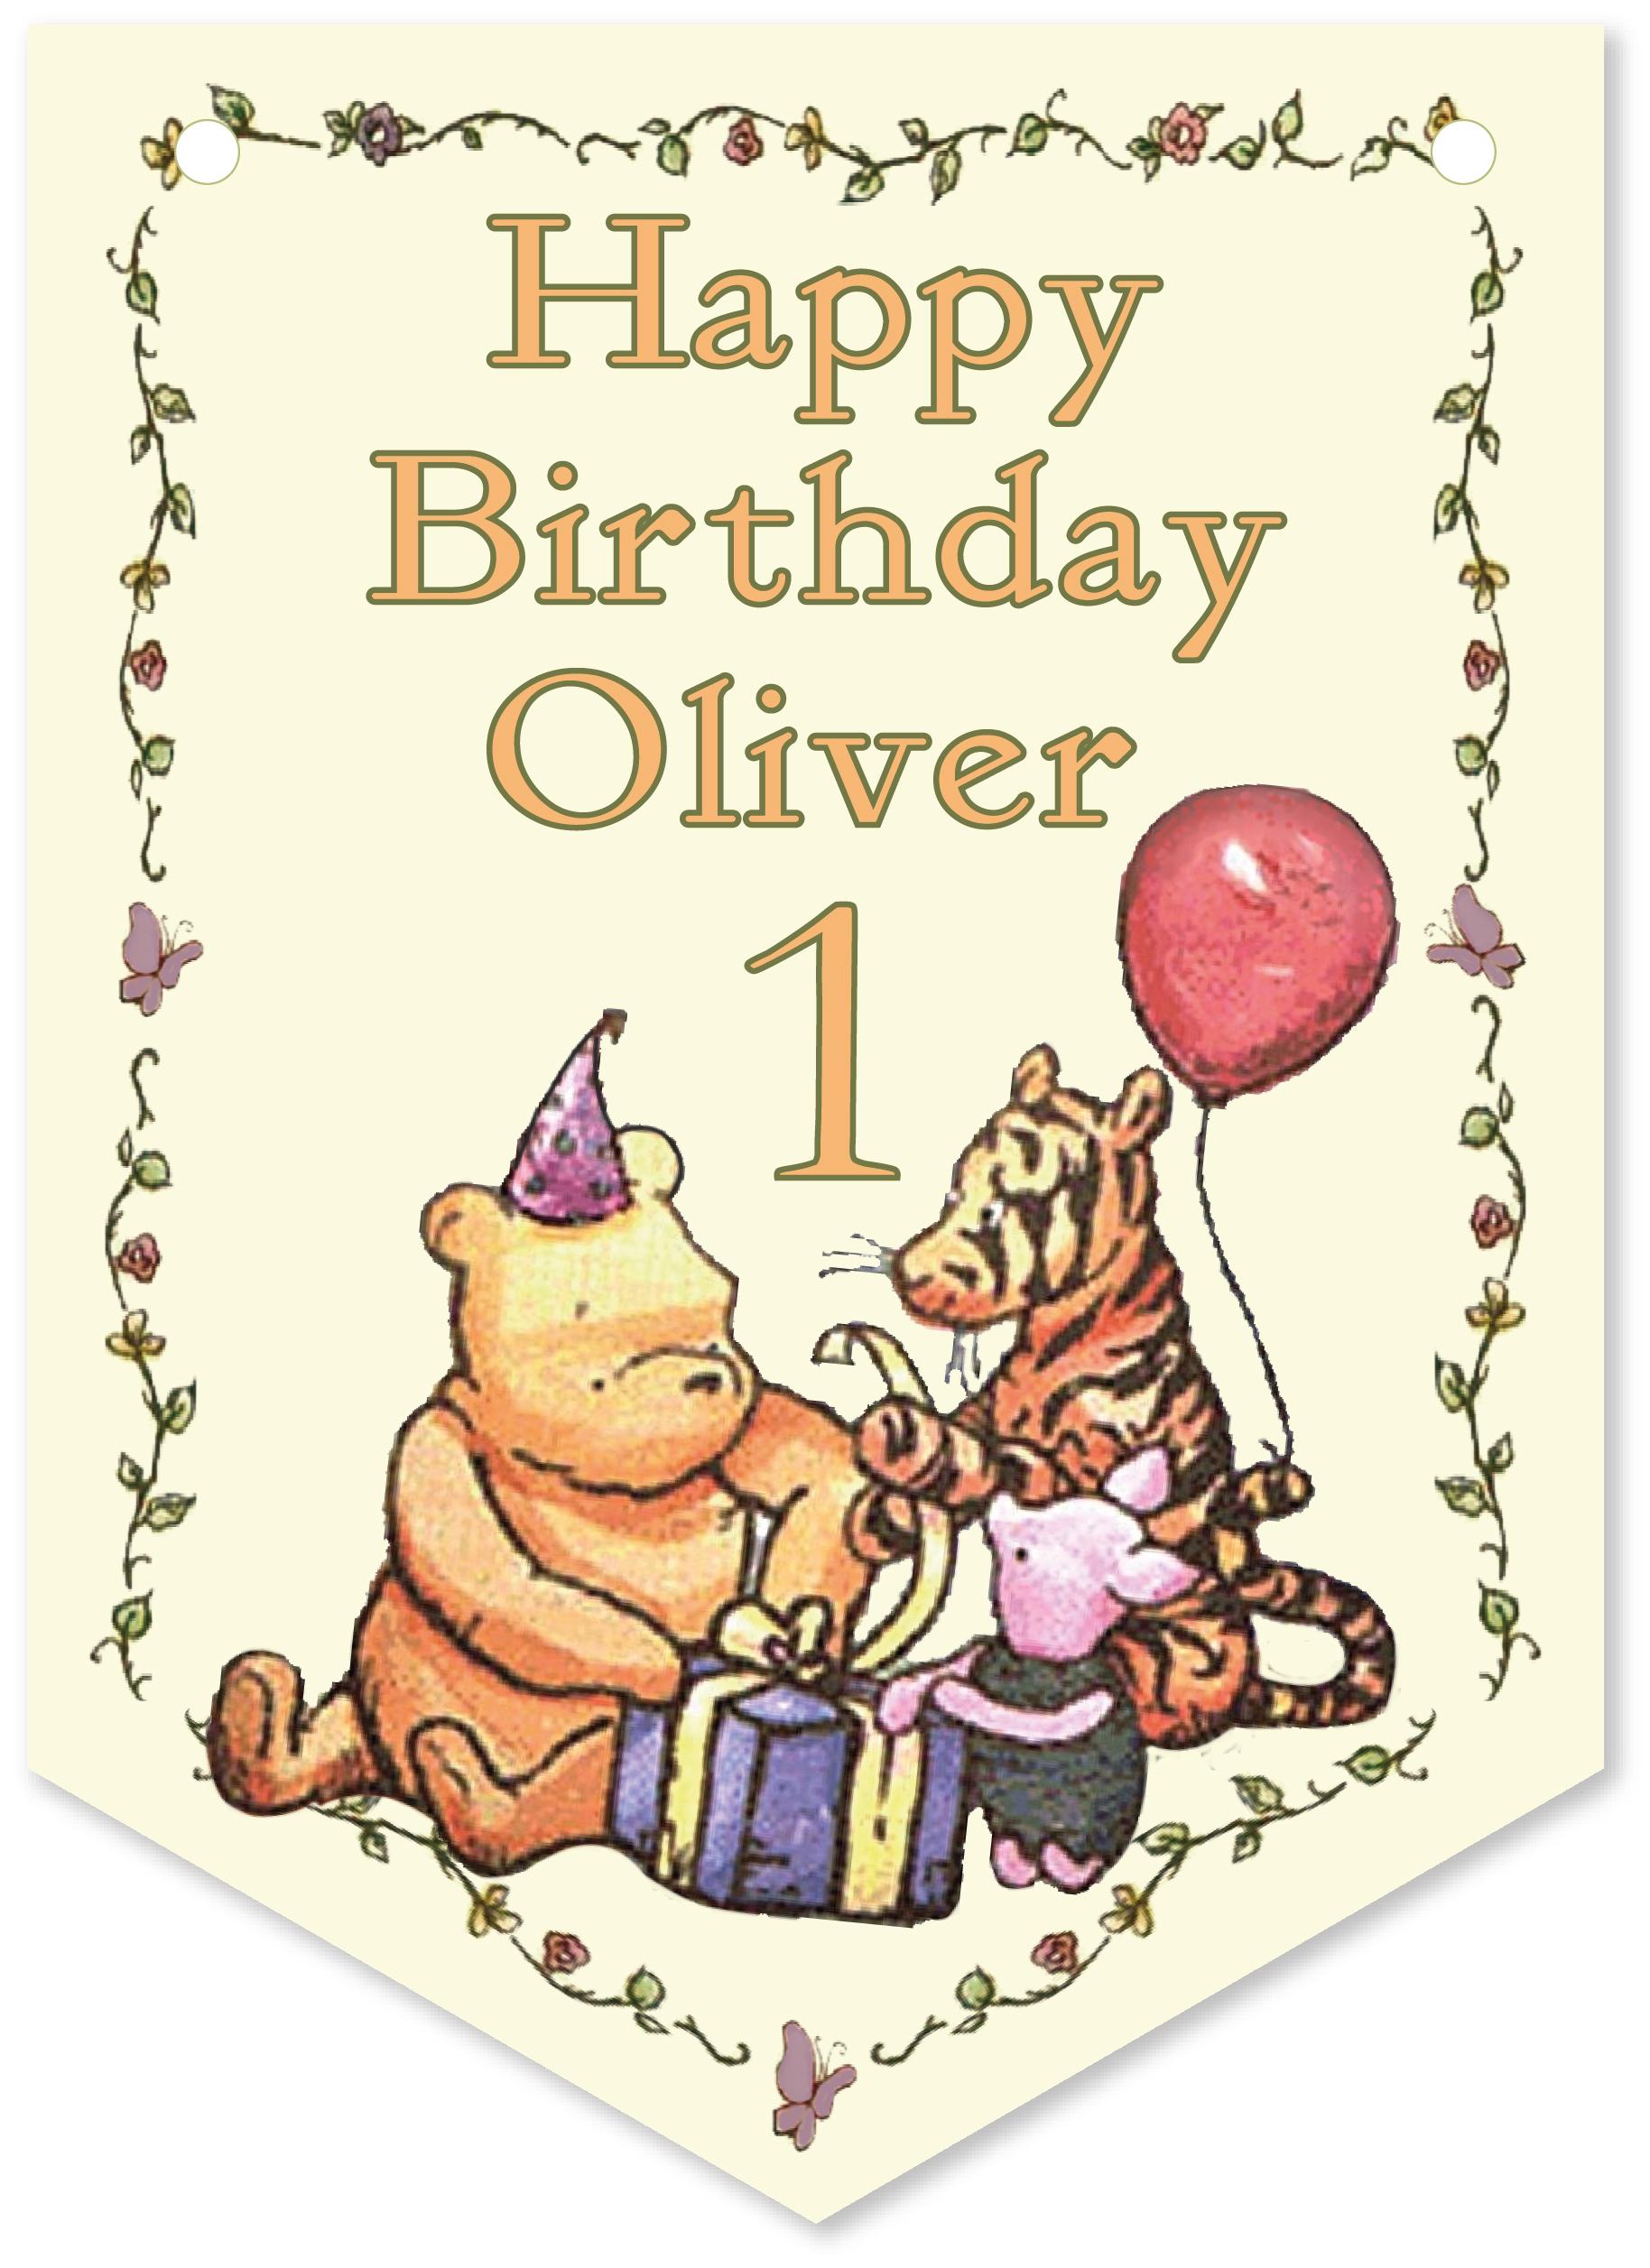 Winnie the pooh personalised birthday banner,birthday party decorations